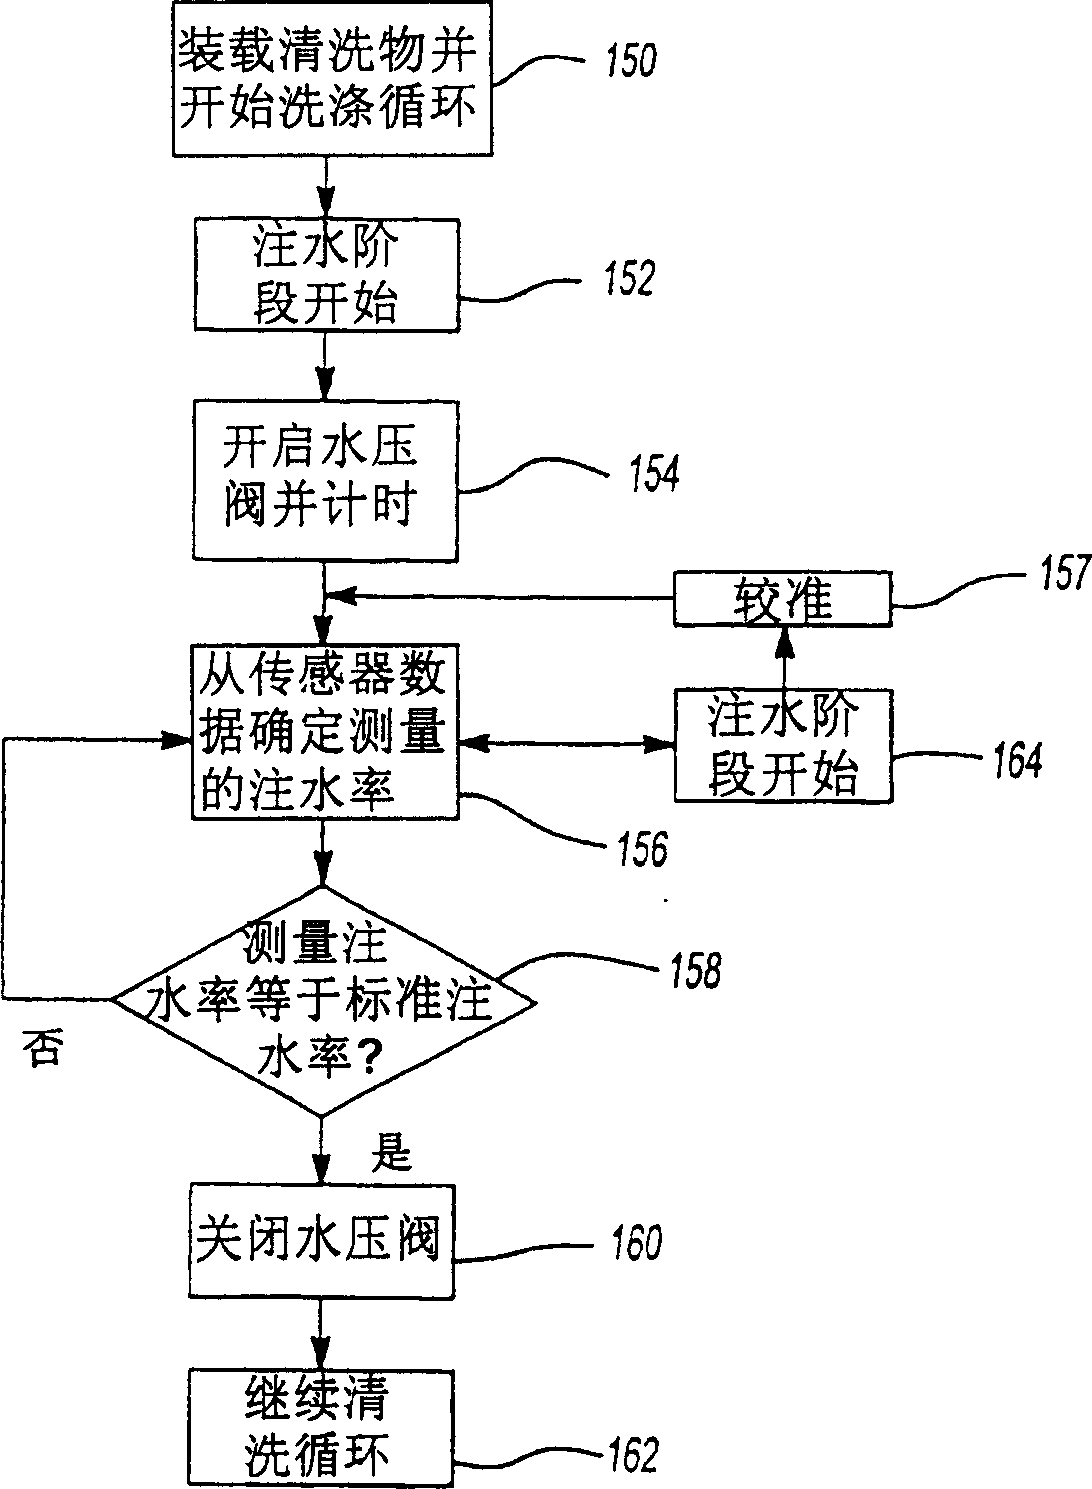 Washing machine with water control and associated method